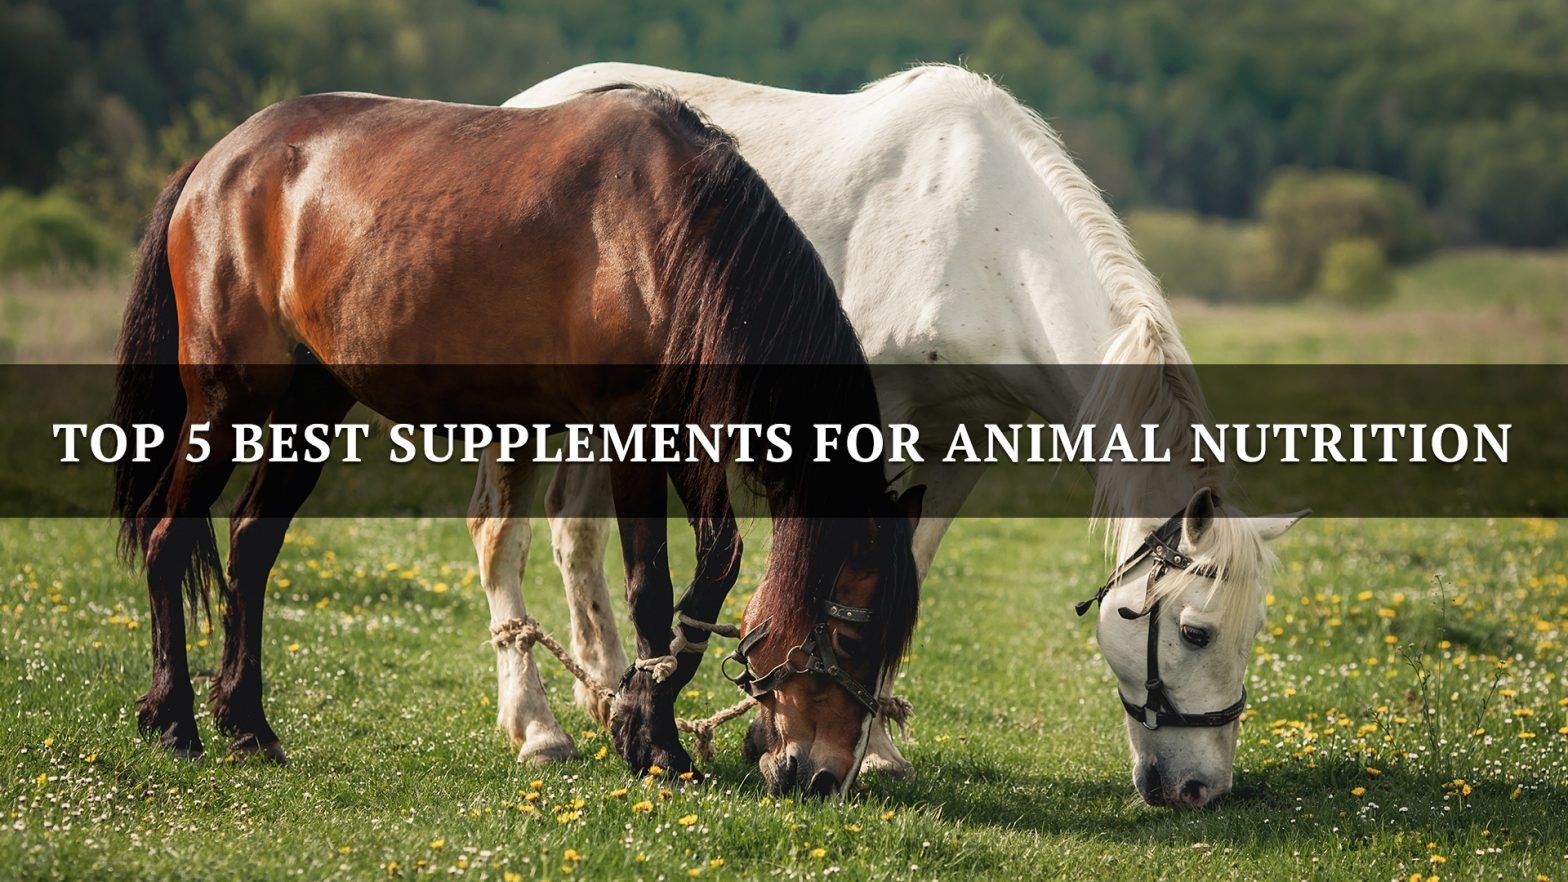 Top 5 best supplements for animal nutrition